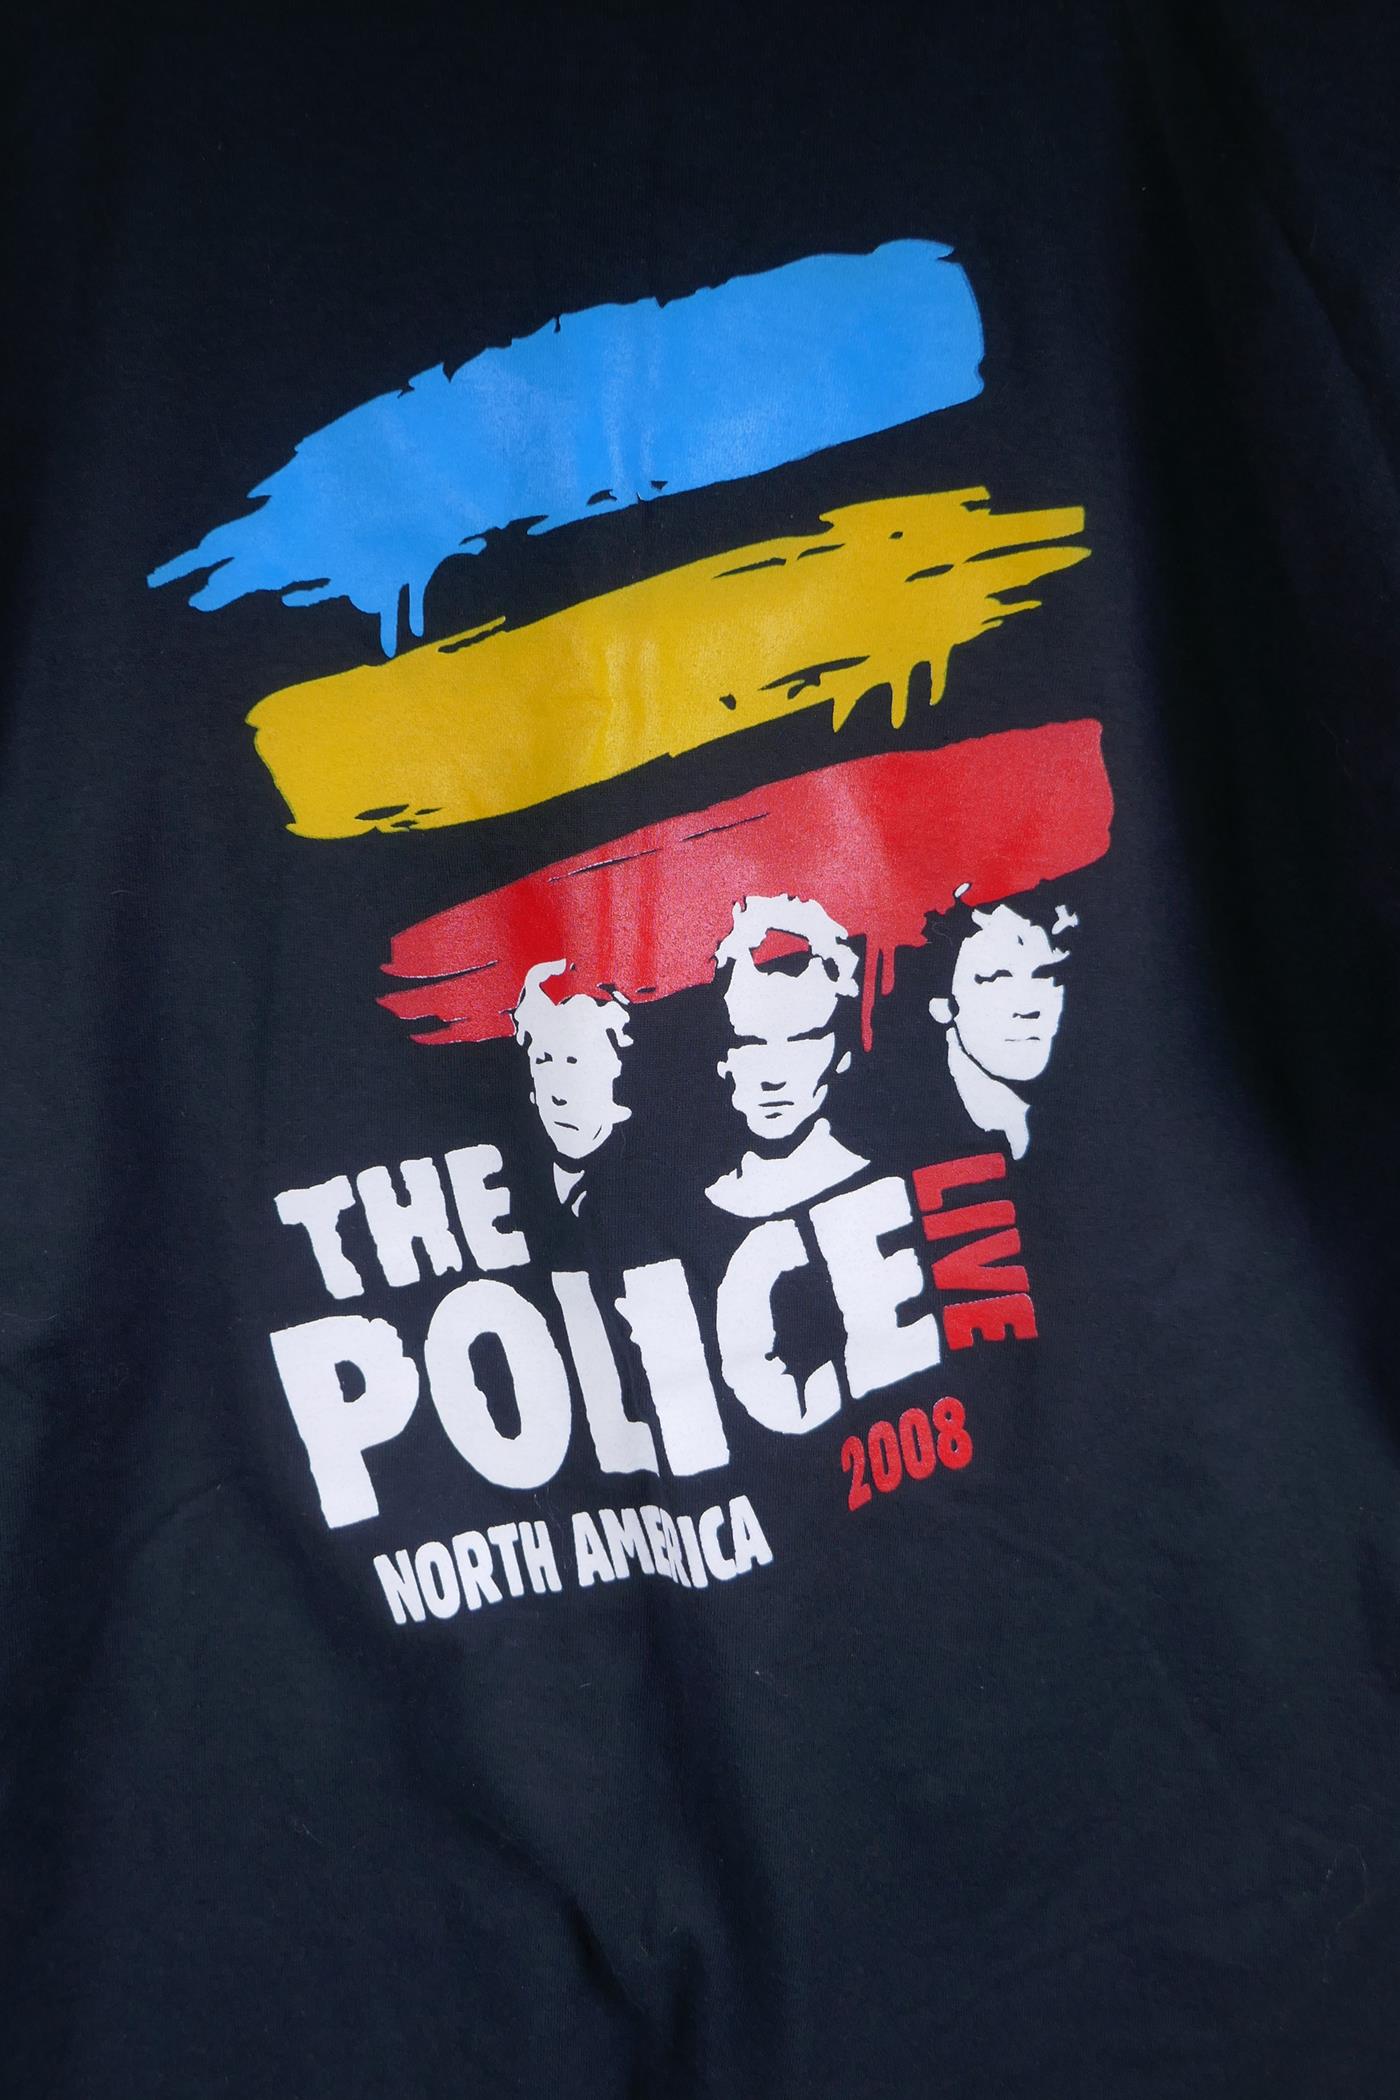 A crew tour T-shirt for The Police North America 2008 tour, size L/G - Image 2 of 4